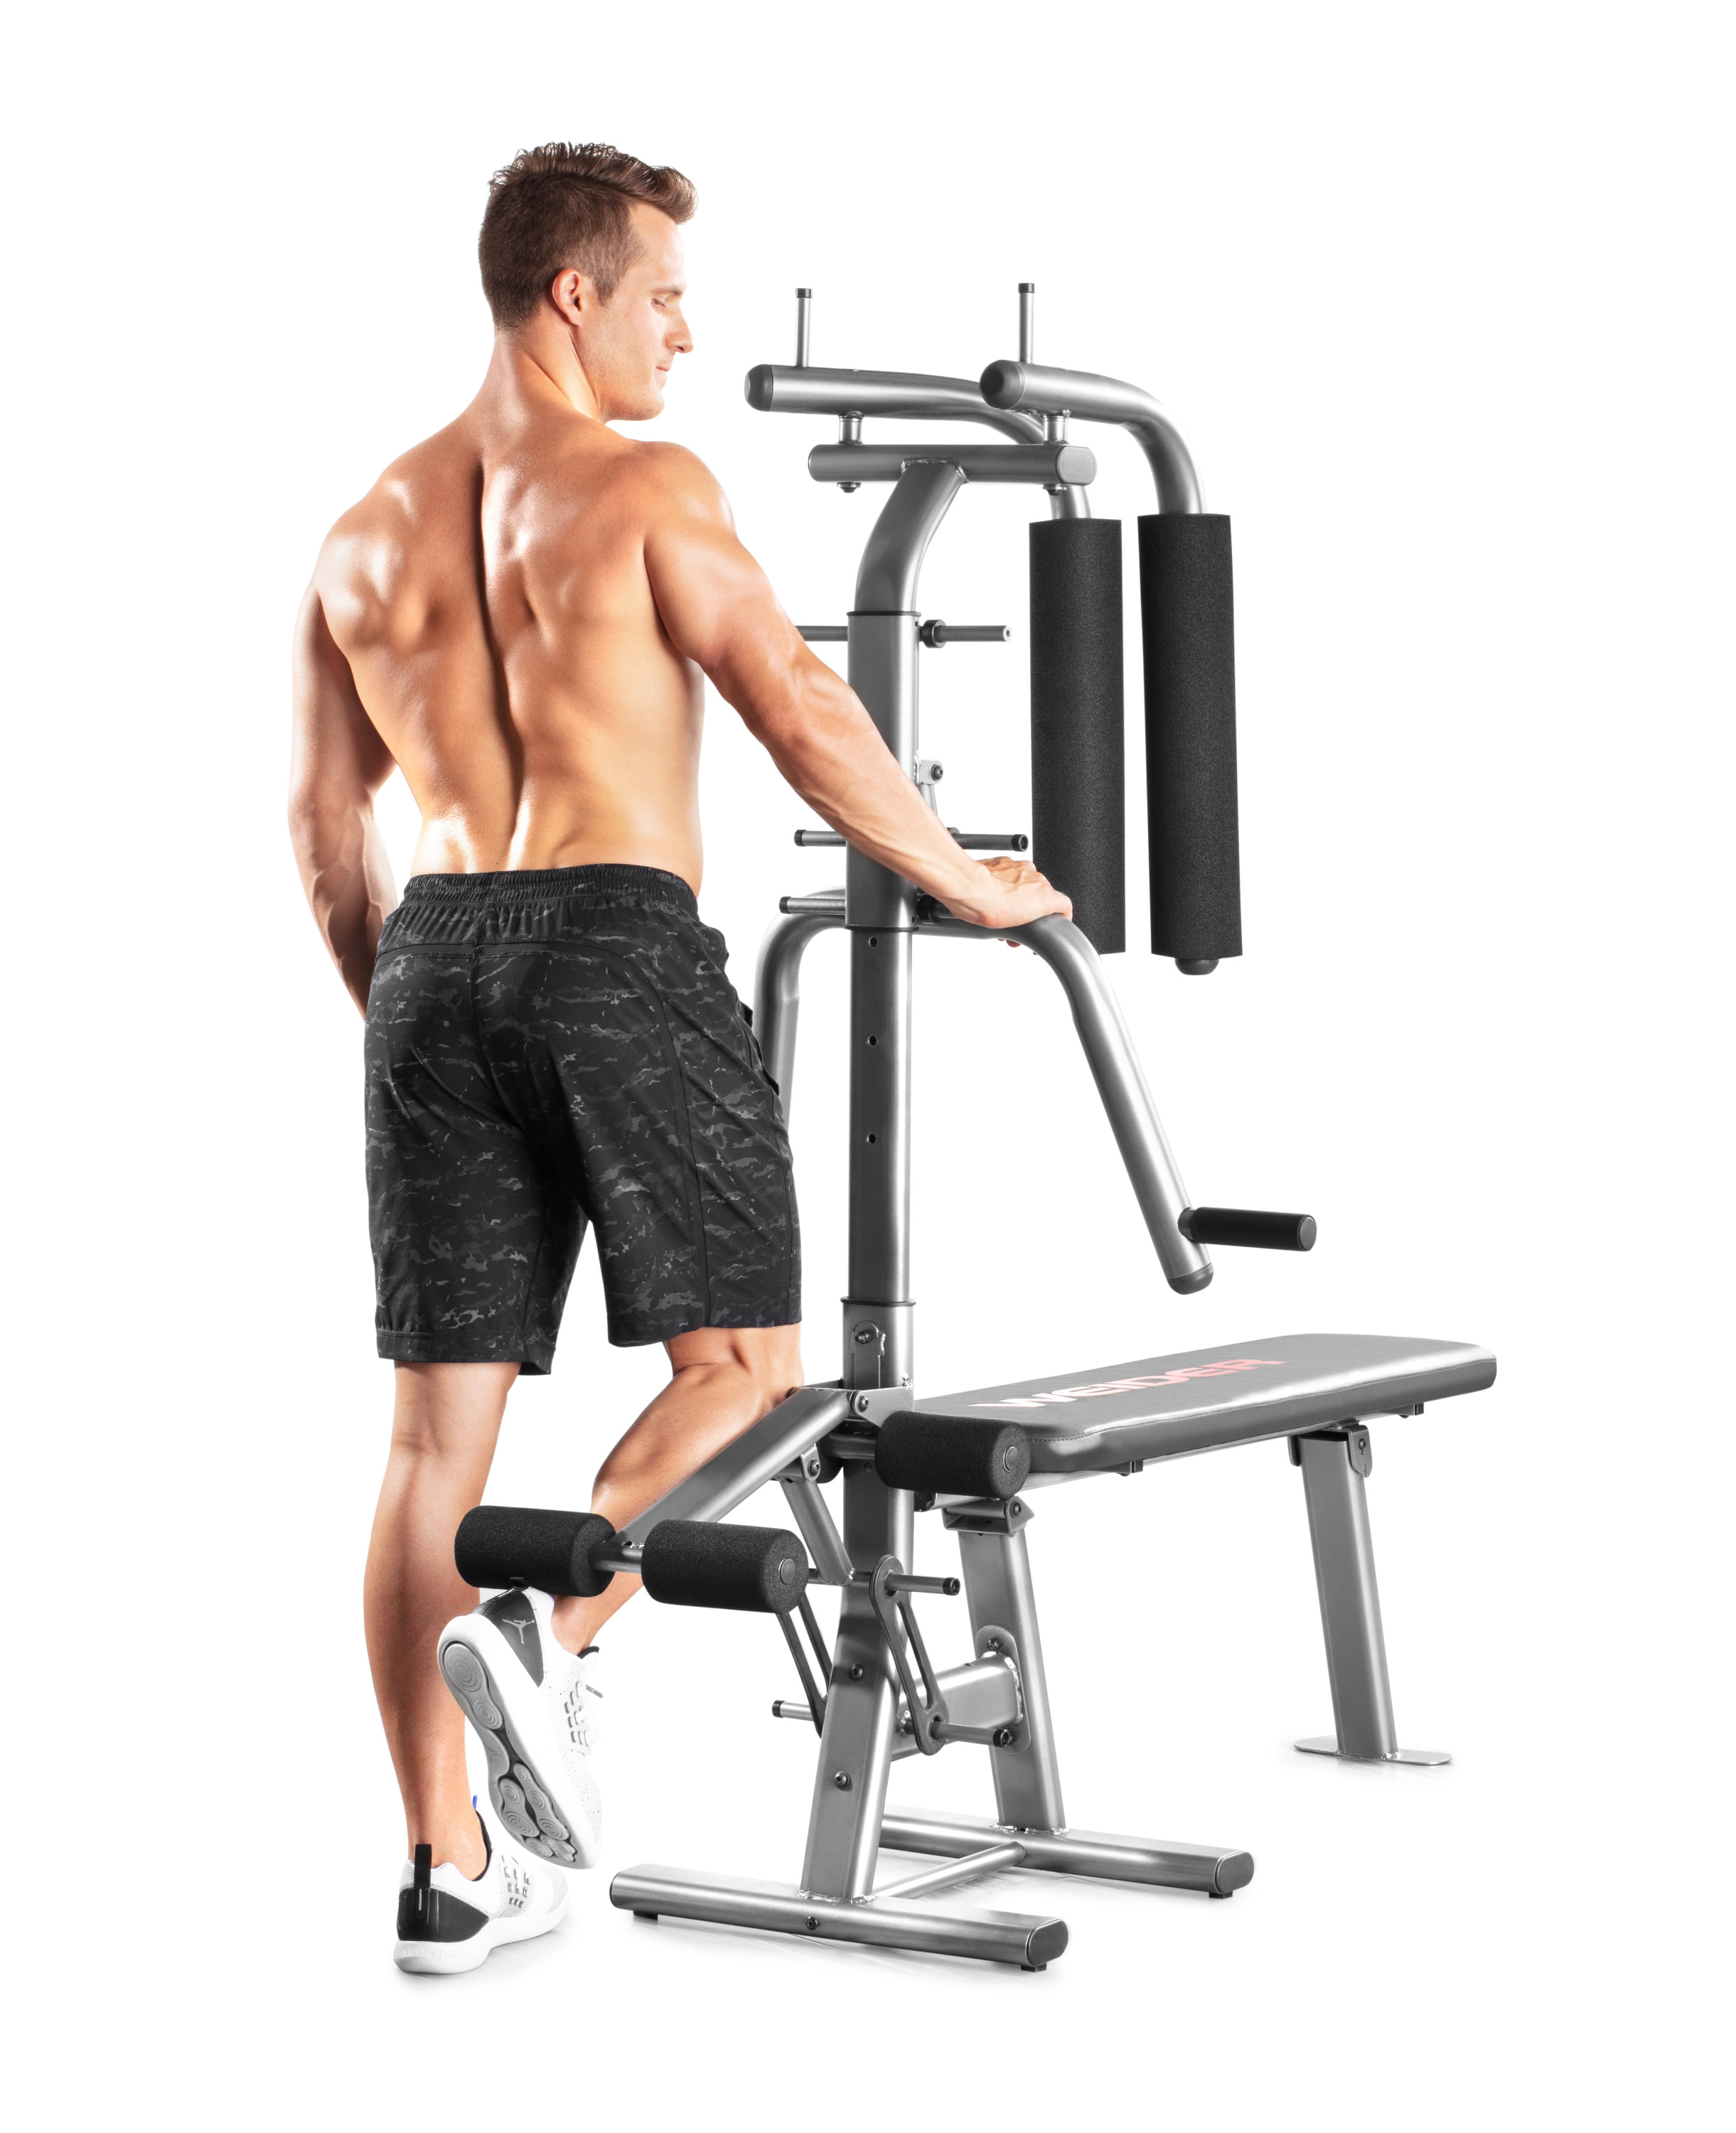 Weider Flex CTS Home Gym System with 14 Resistance Bands and Professionally-Designed Excercise Chart - image 5 of 11